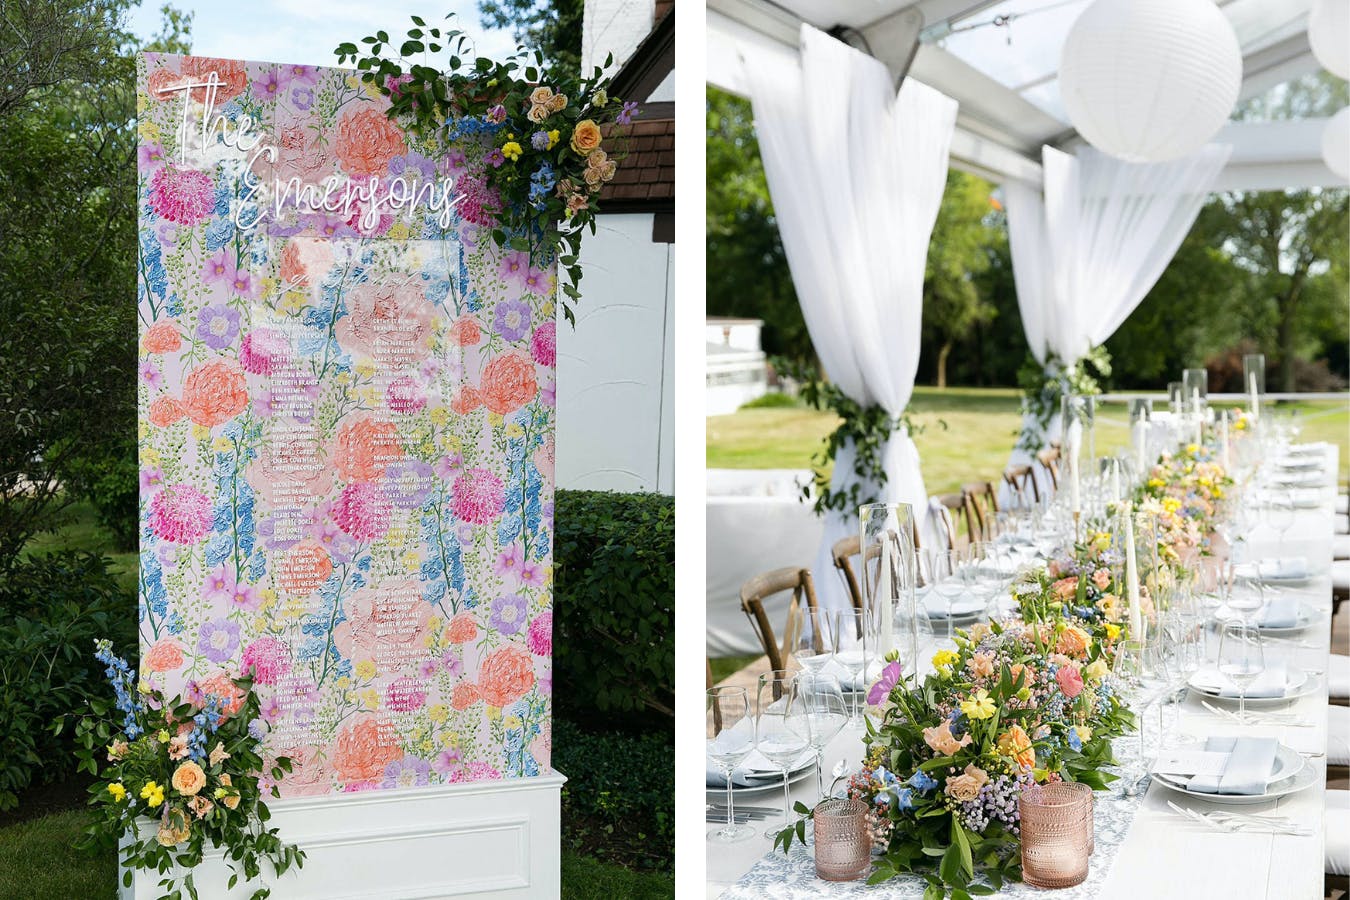 Outdoor Canopy Wedding With White Drapery, Floral Centerpieces, and Colorful Wedding Seating Chart | PartySlate